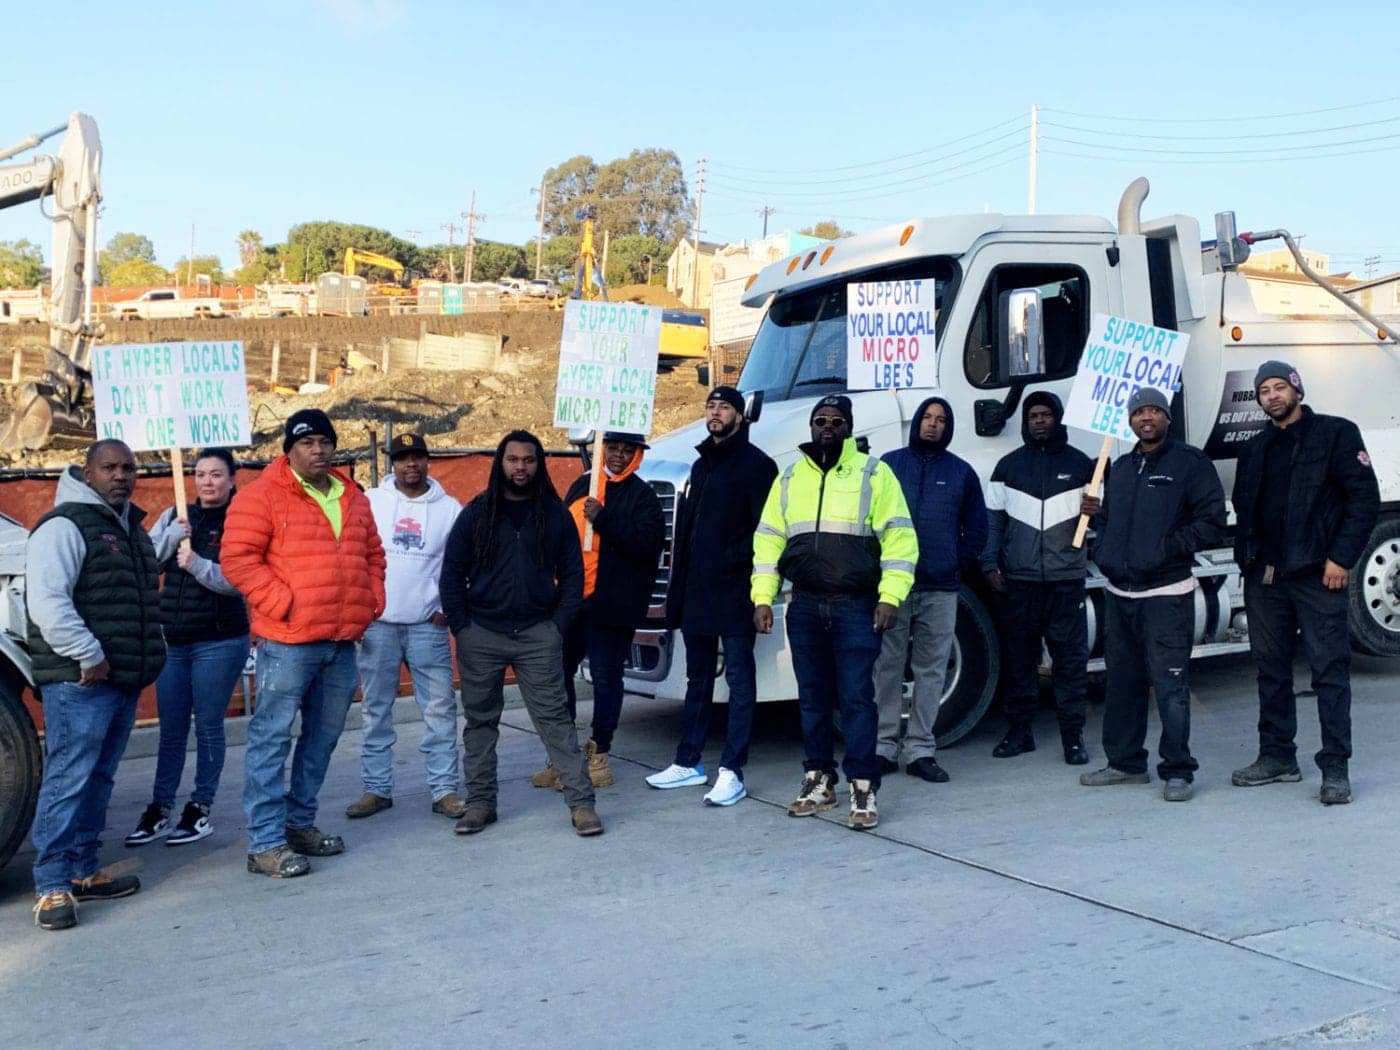 Local-Black-truckers-contractors-group-photo-site-protest-26th-Connecticut-3-121422-1400x1050, <strong>Black contractors: ‘We want to put our community to work’</strong>, Local News & Views 